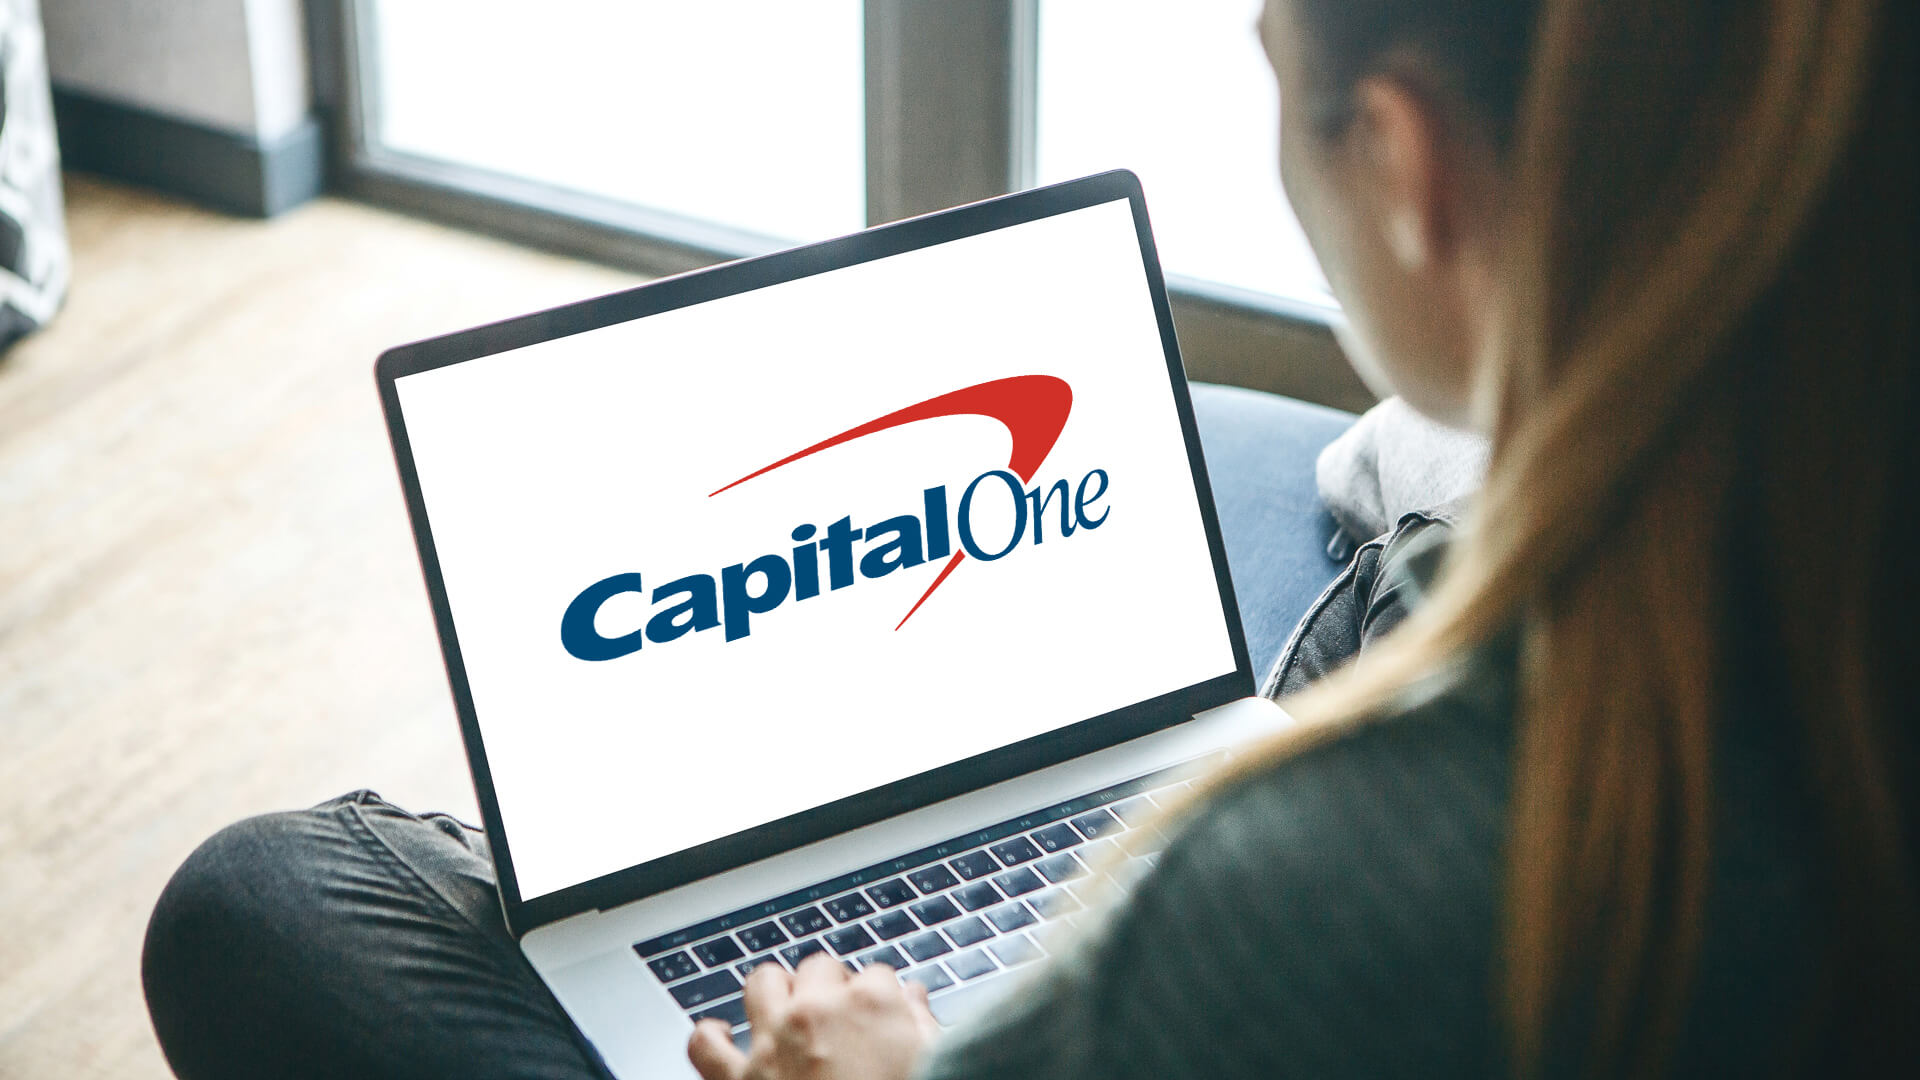 capitol one business banking